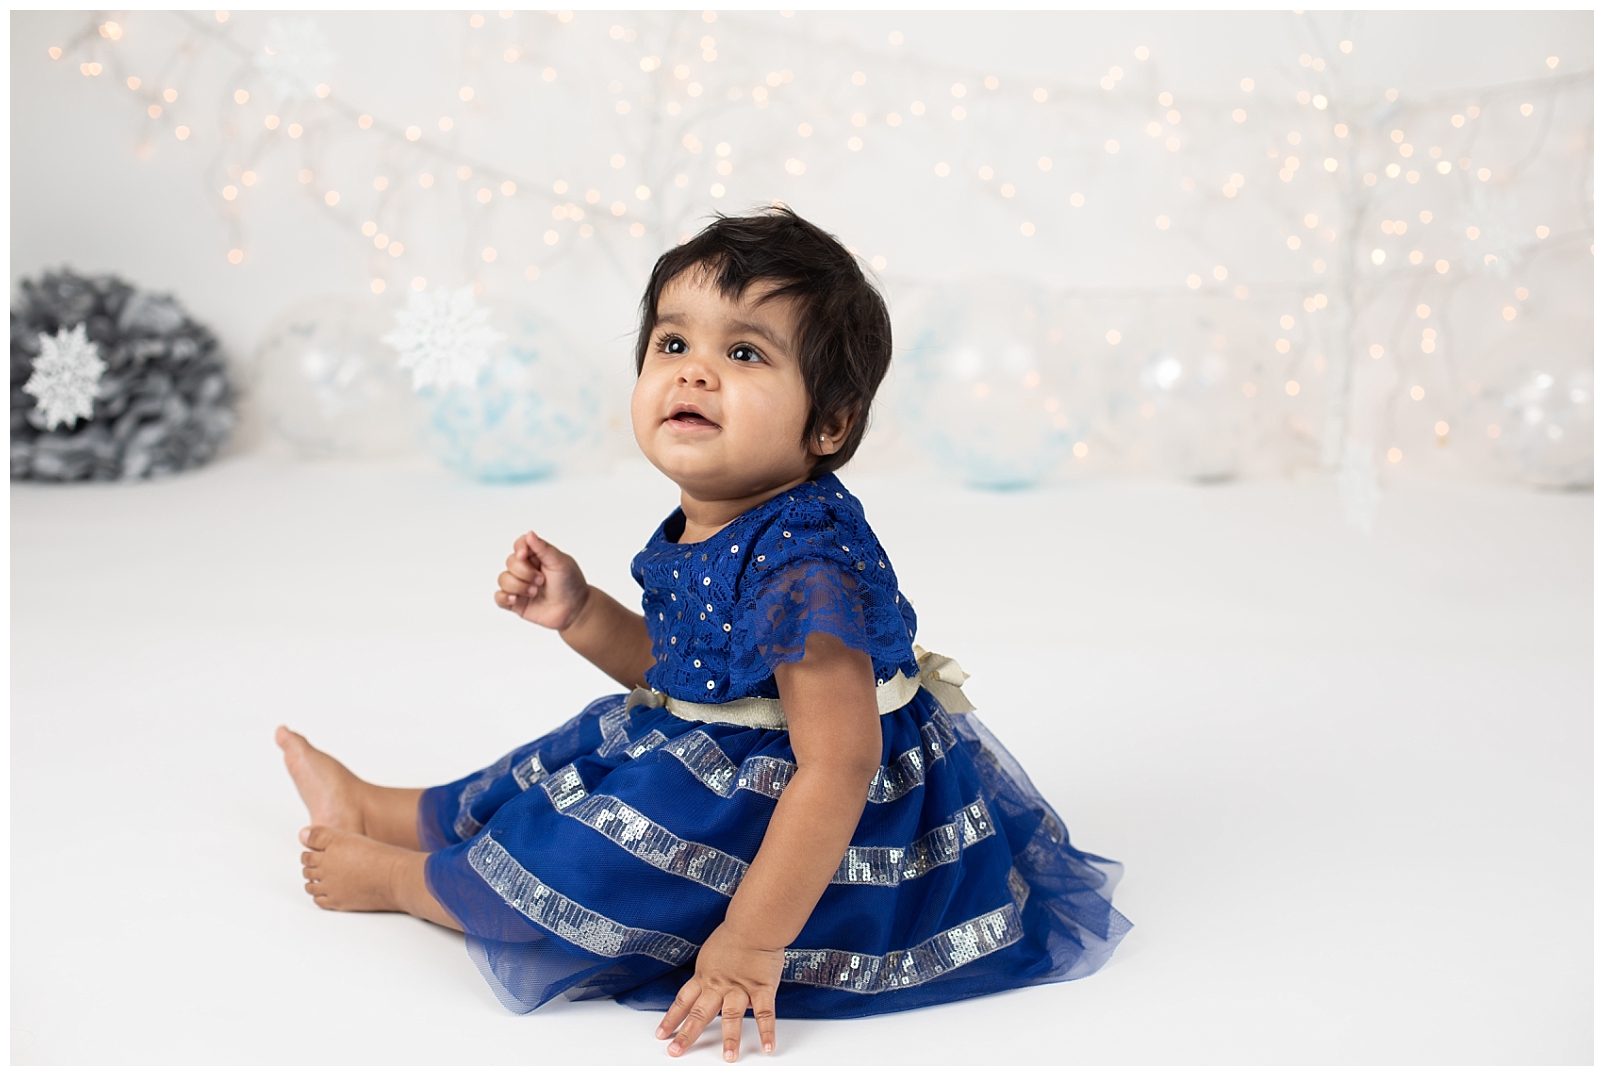 Baby wearing blue dress with snowflakes background